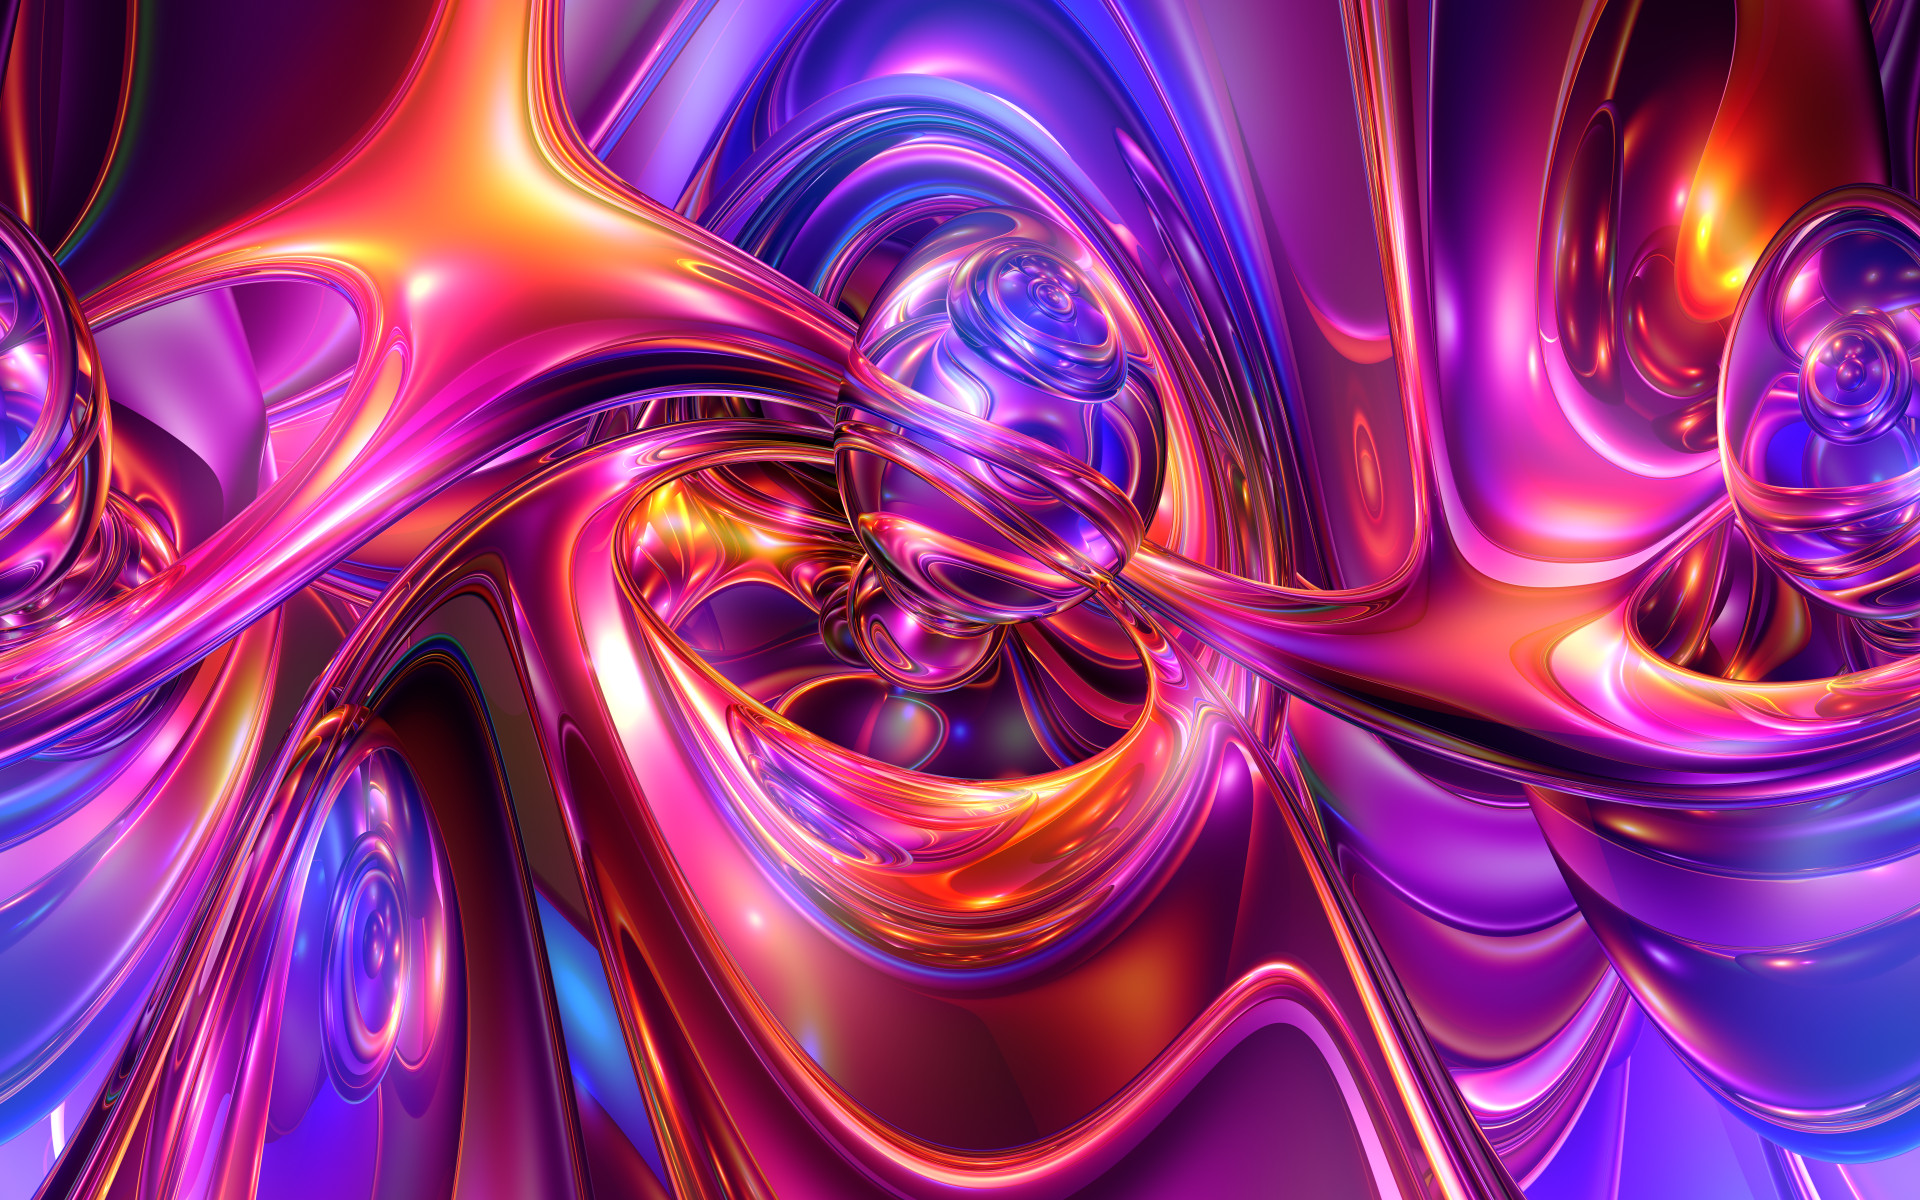 3d, purple, abstract, colorful, swirl, cgi, colors, pink UHD